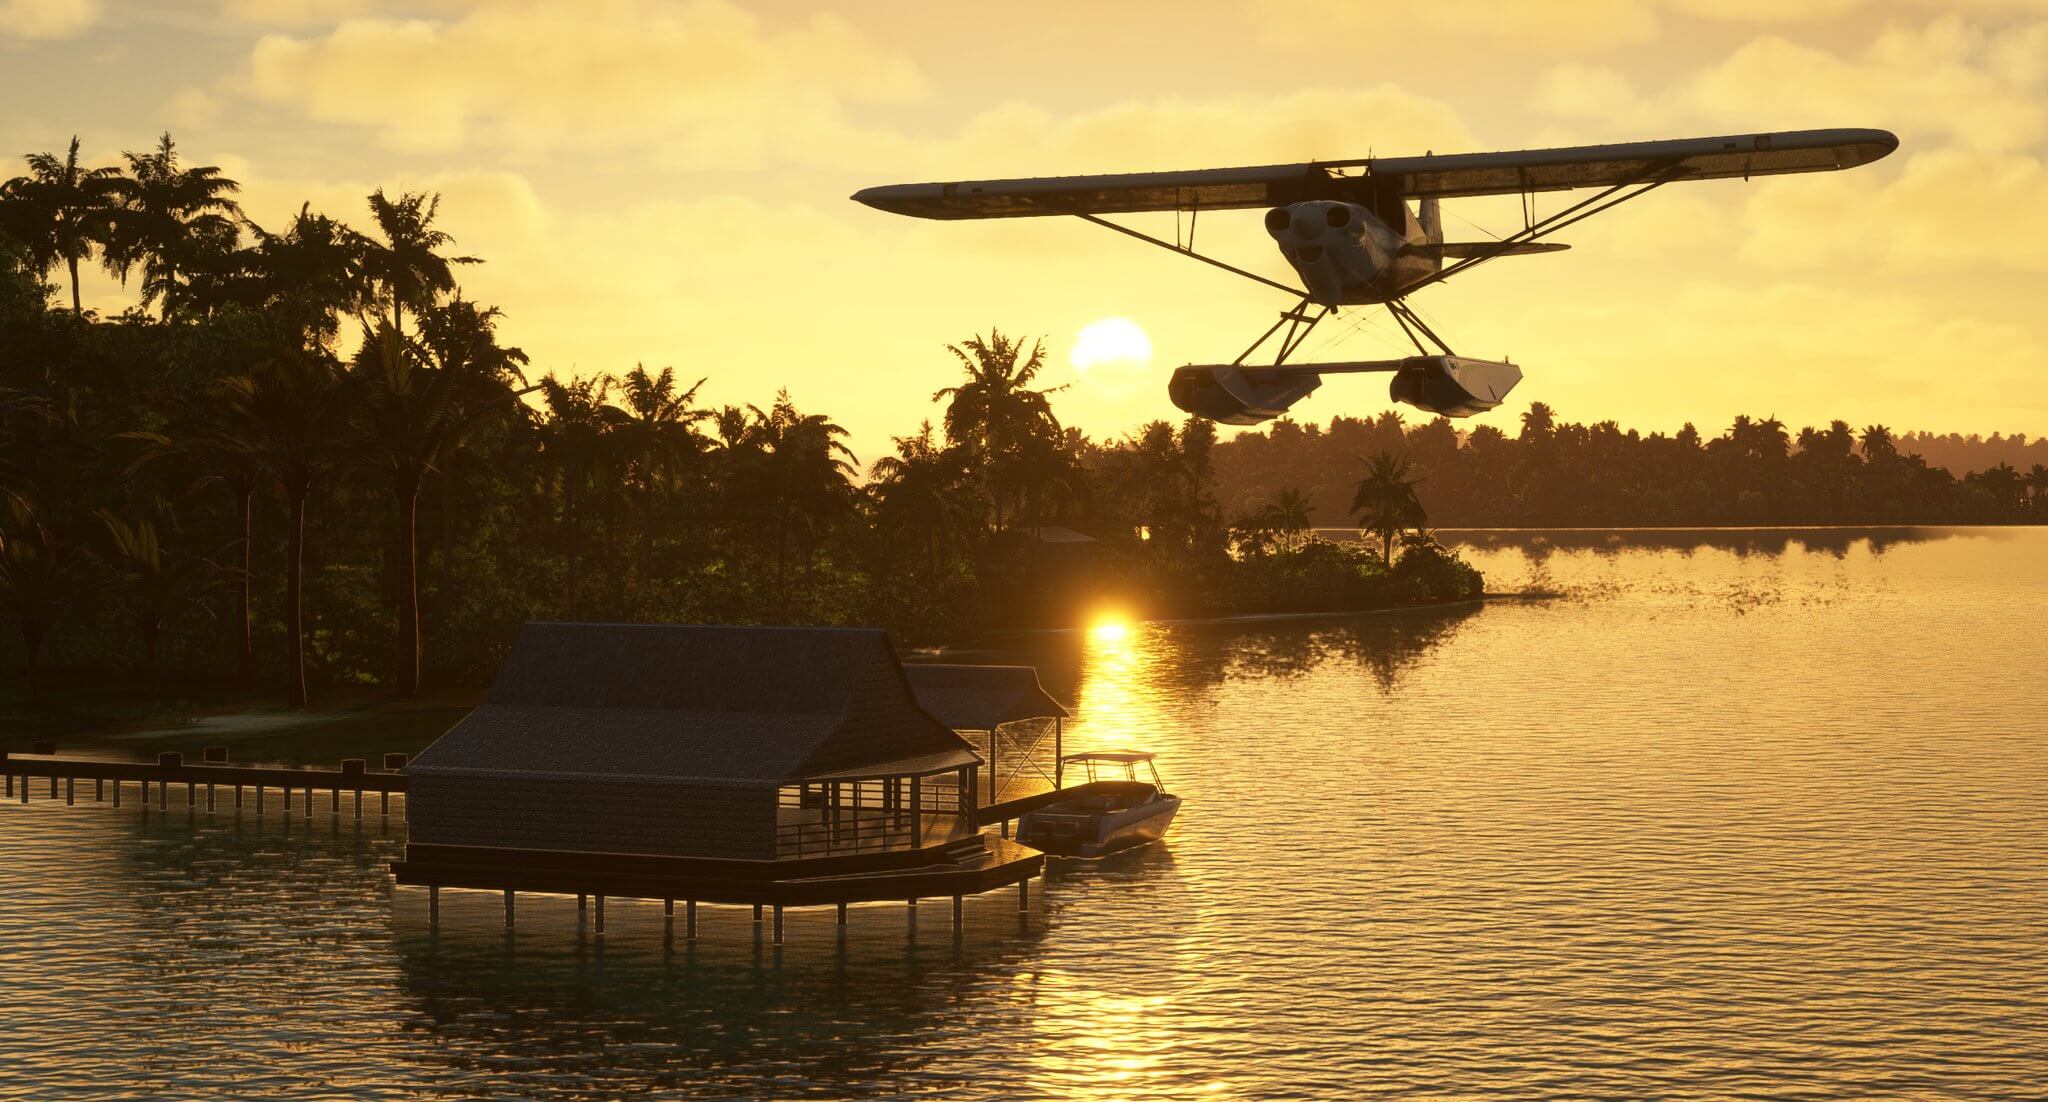 An X-Cub with floats flies close to a marina with the sun setting over palm trees in the distance